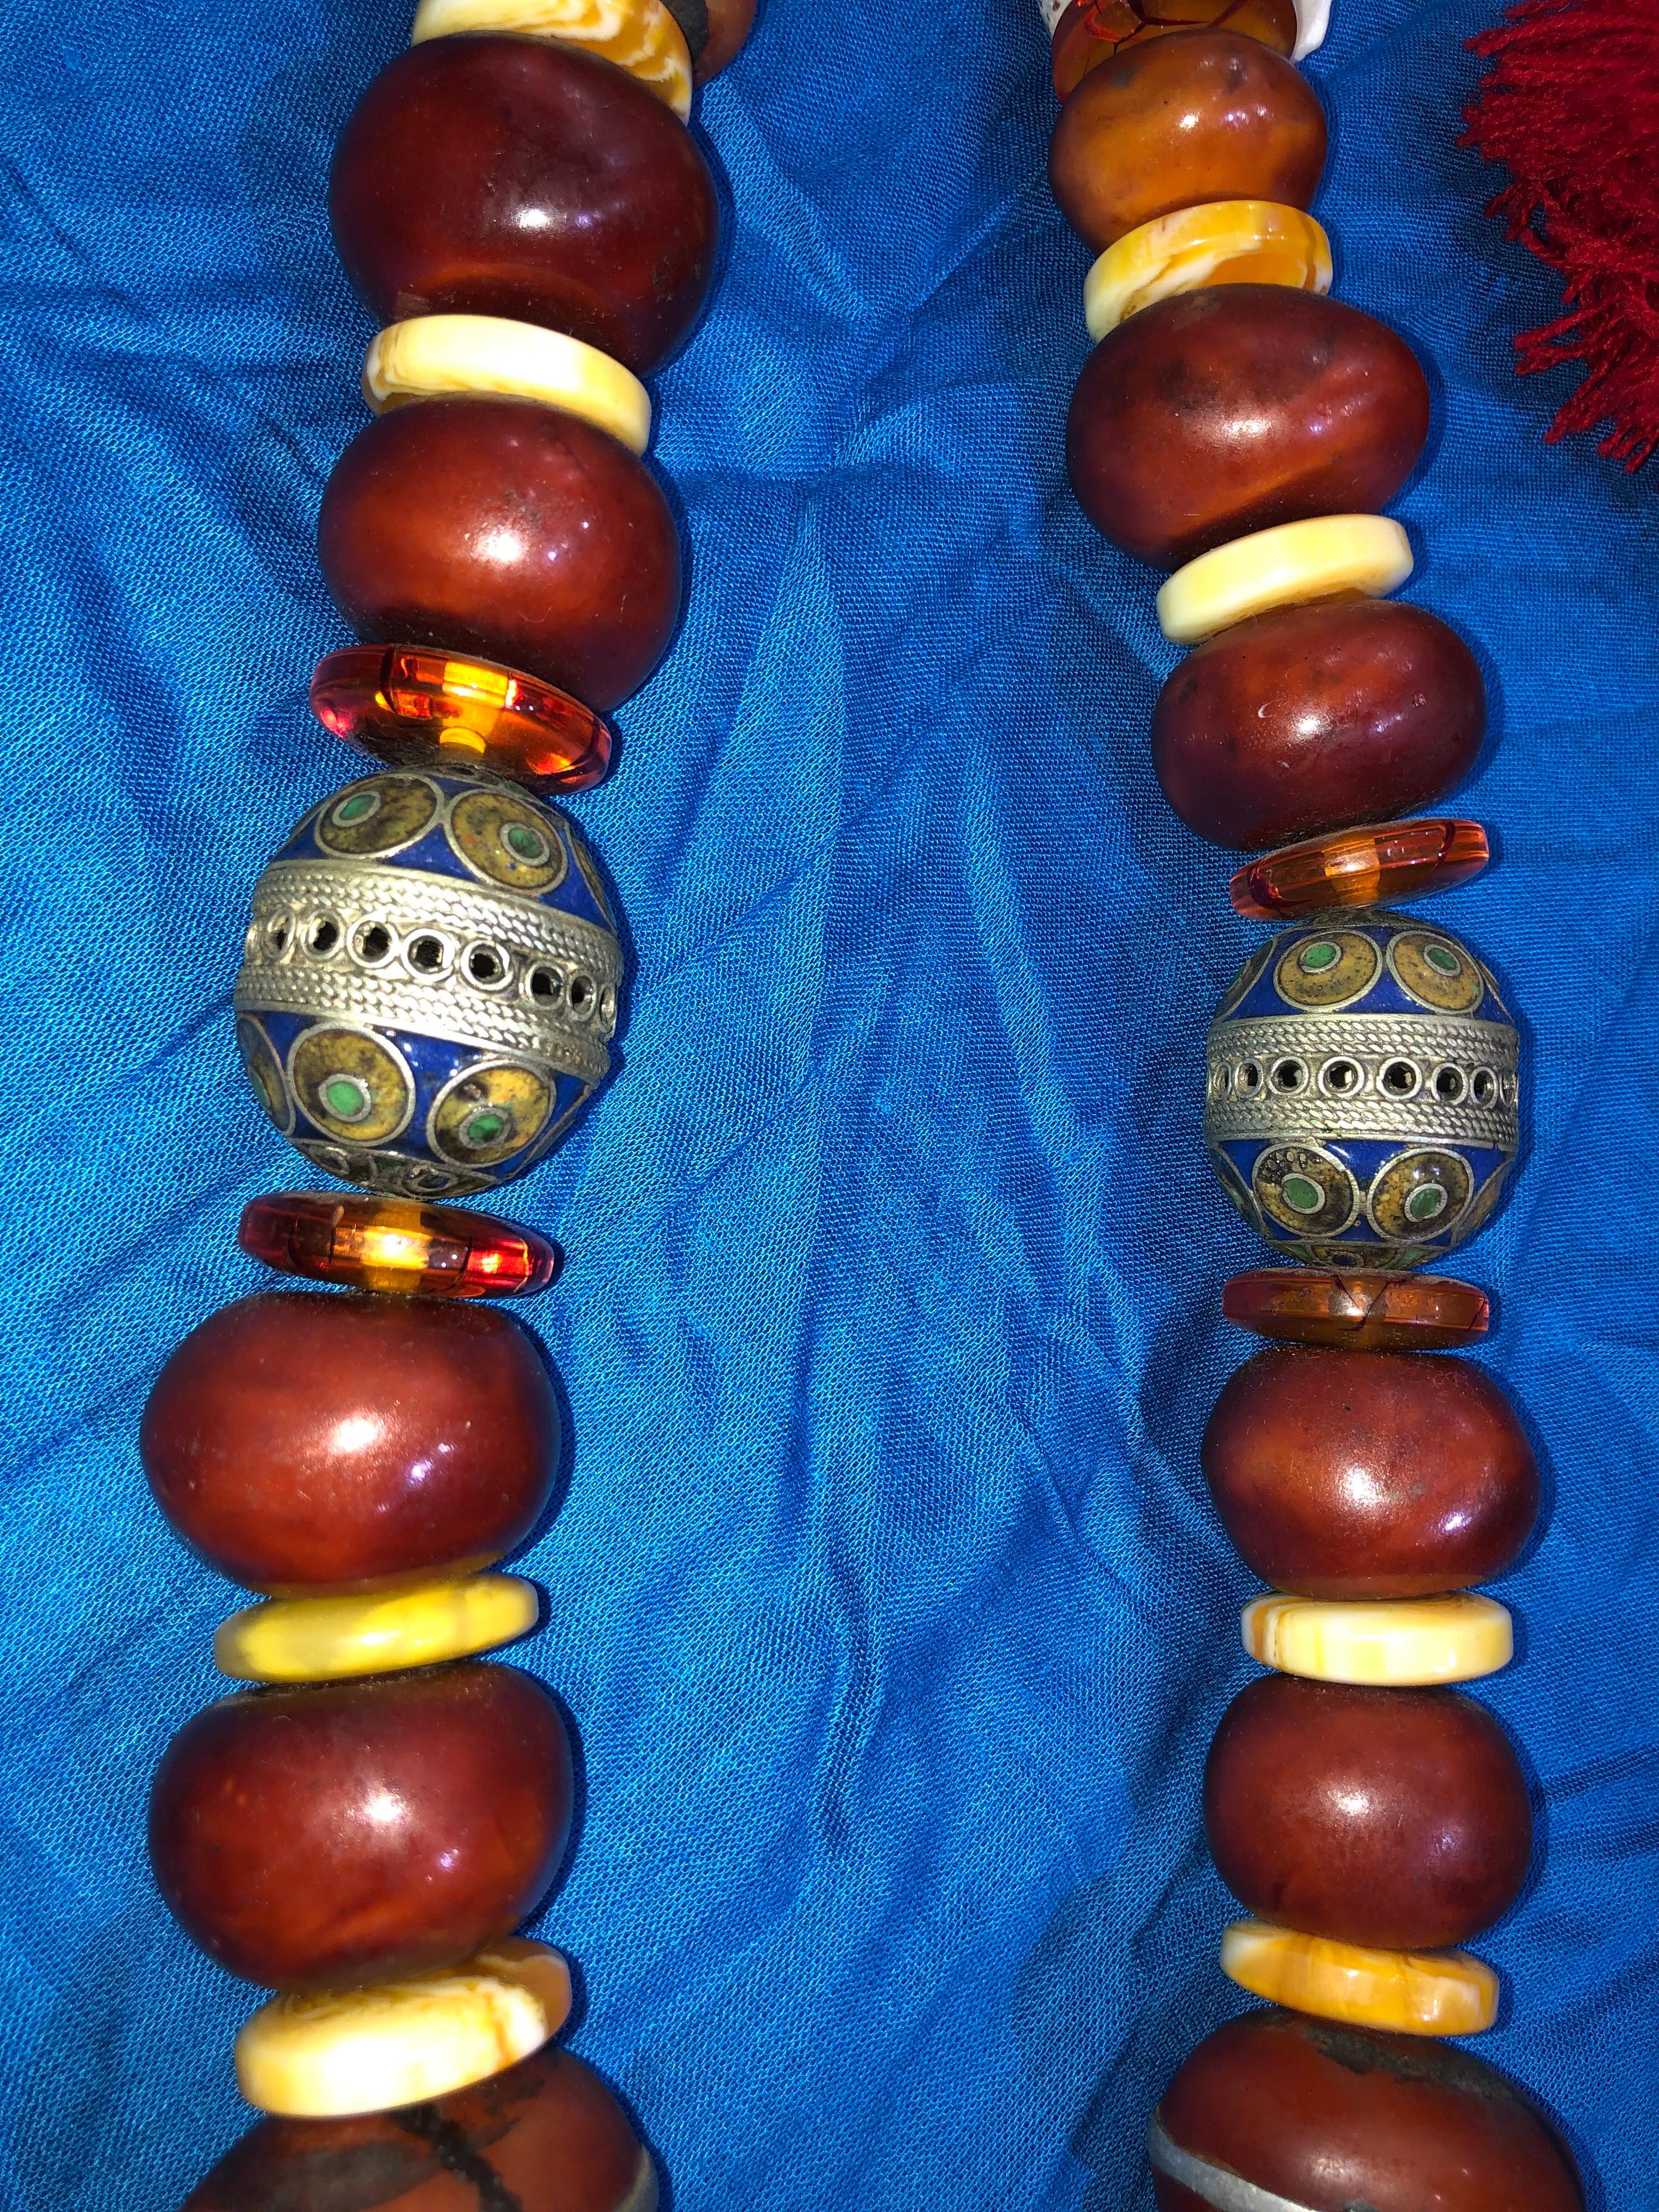 Traditional Moroccan Berber Wedding Celebration Necklace with Fertility Beads In Good Condition For Sale In Vineyard Haven, MA